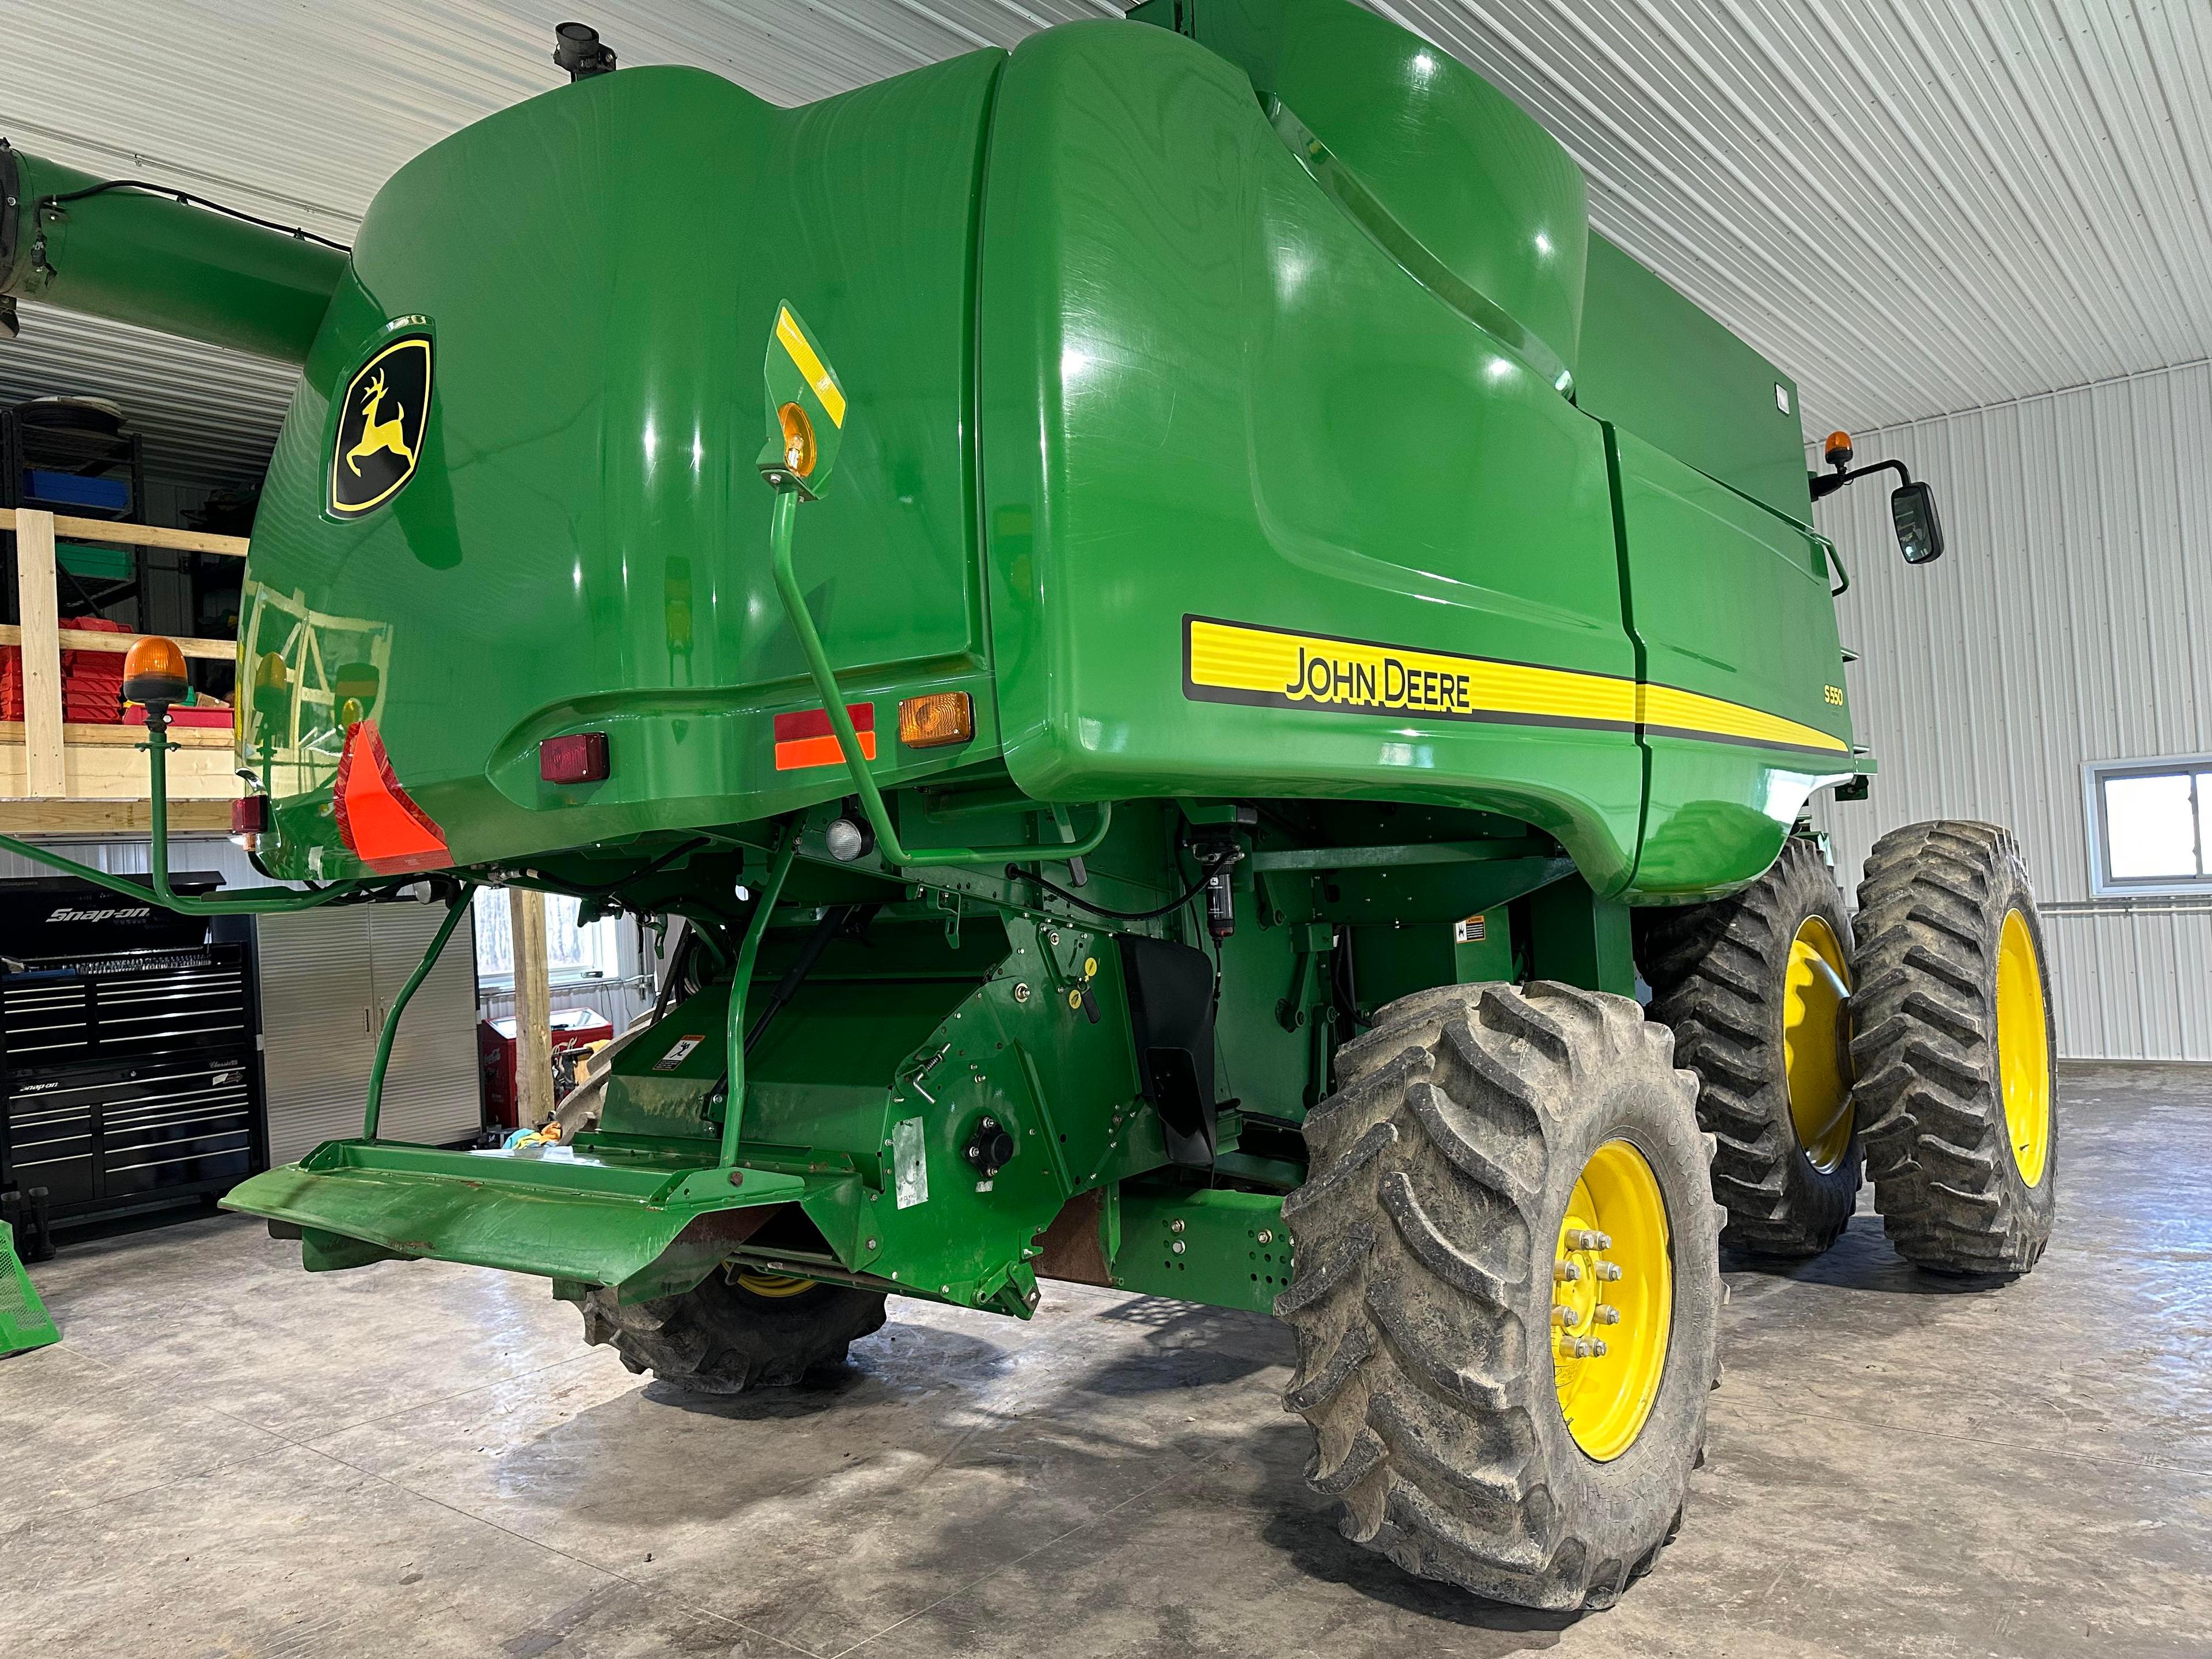 2013 John Deere S550 Combine With 991/588 One Owner Hours, 4 Wheel Drive, Contour Master, Deluxe Cab